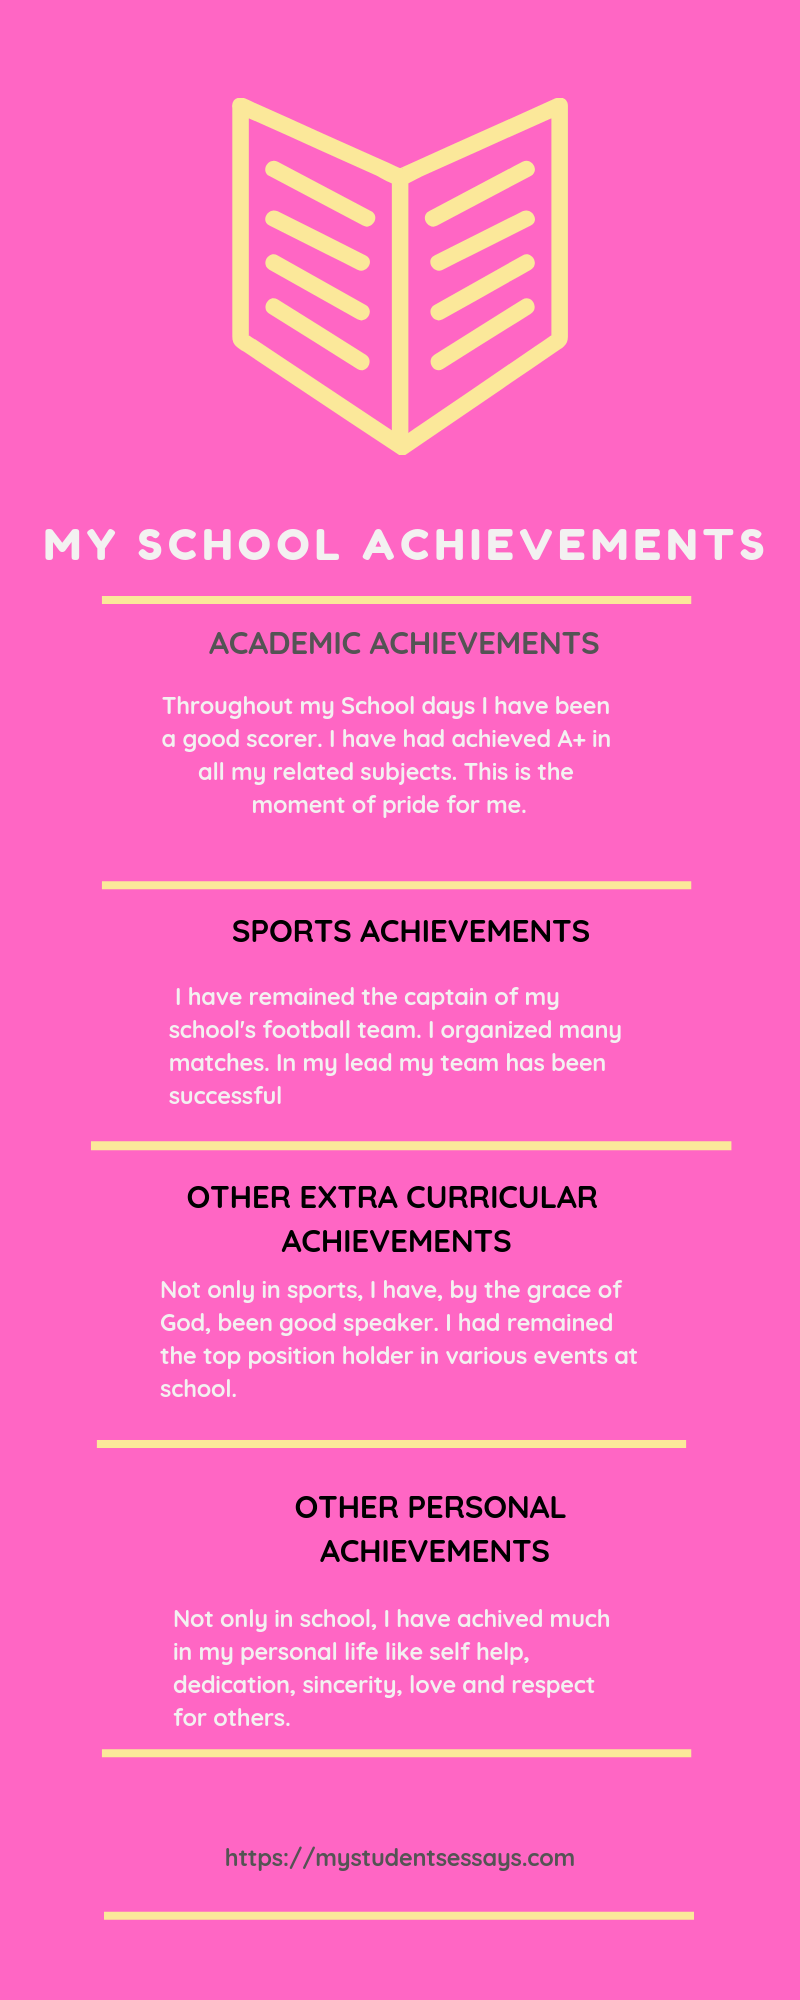 Essay and speech for my school achievments